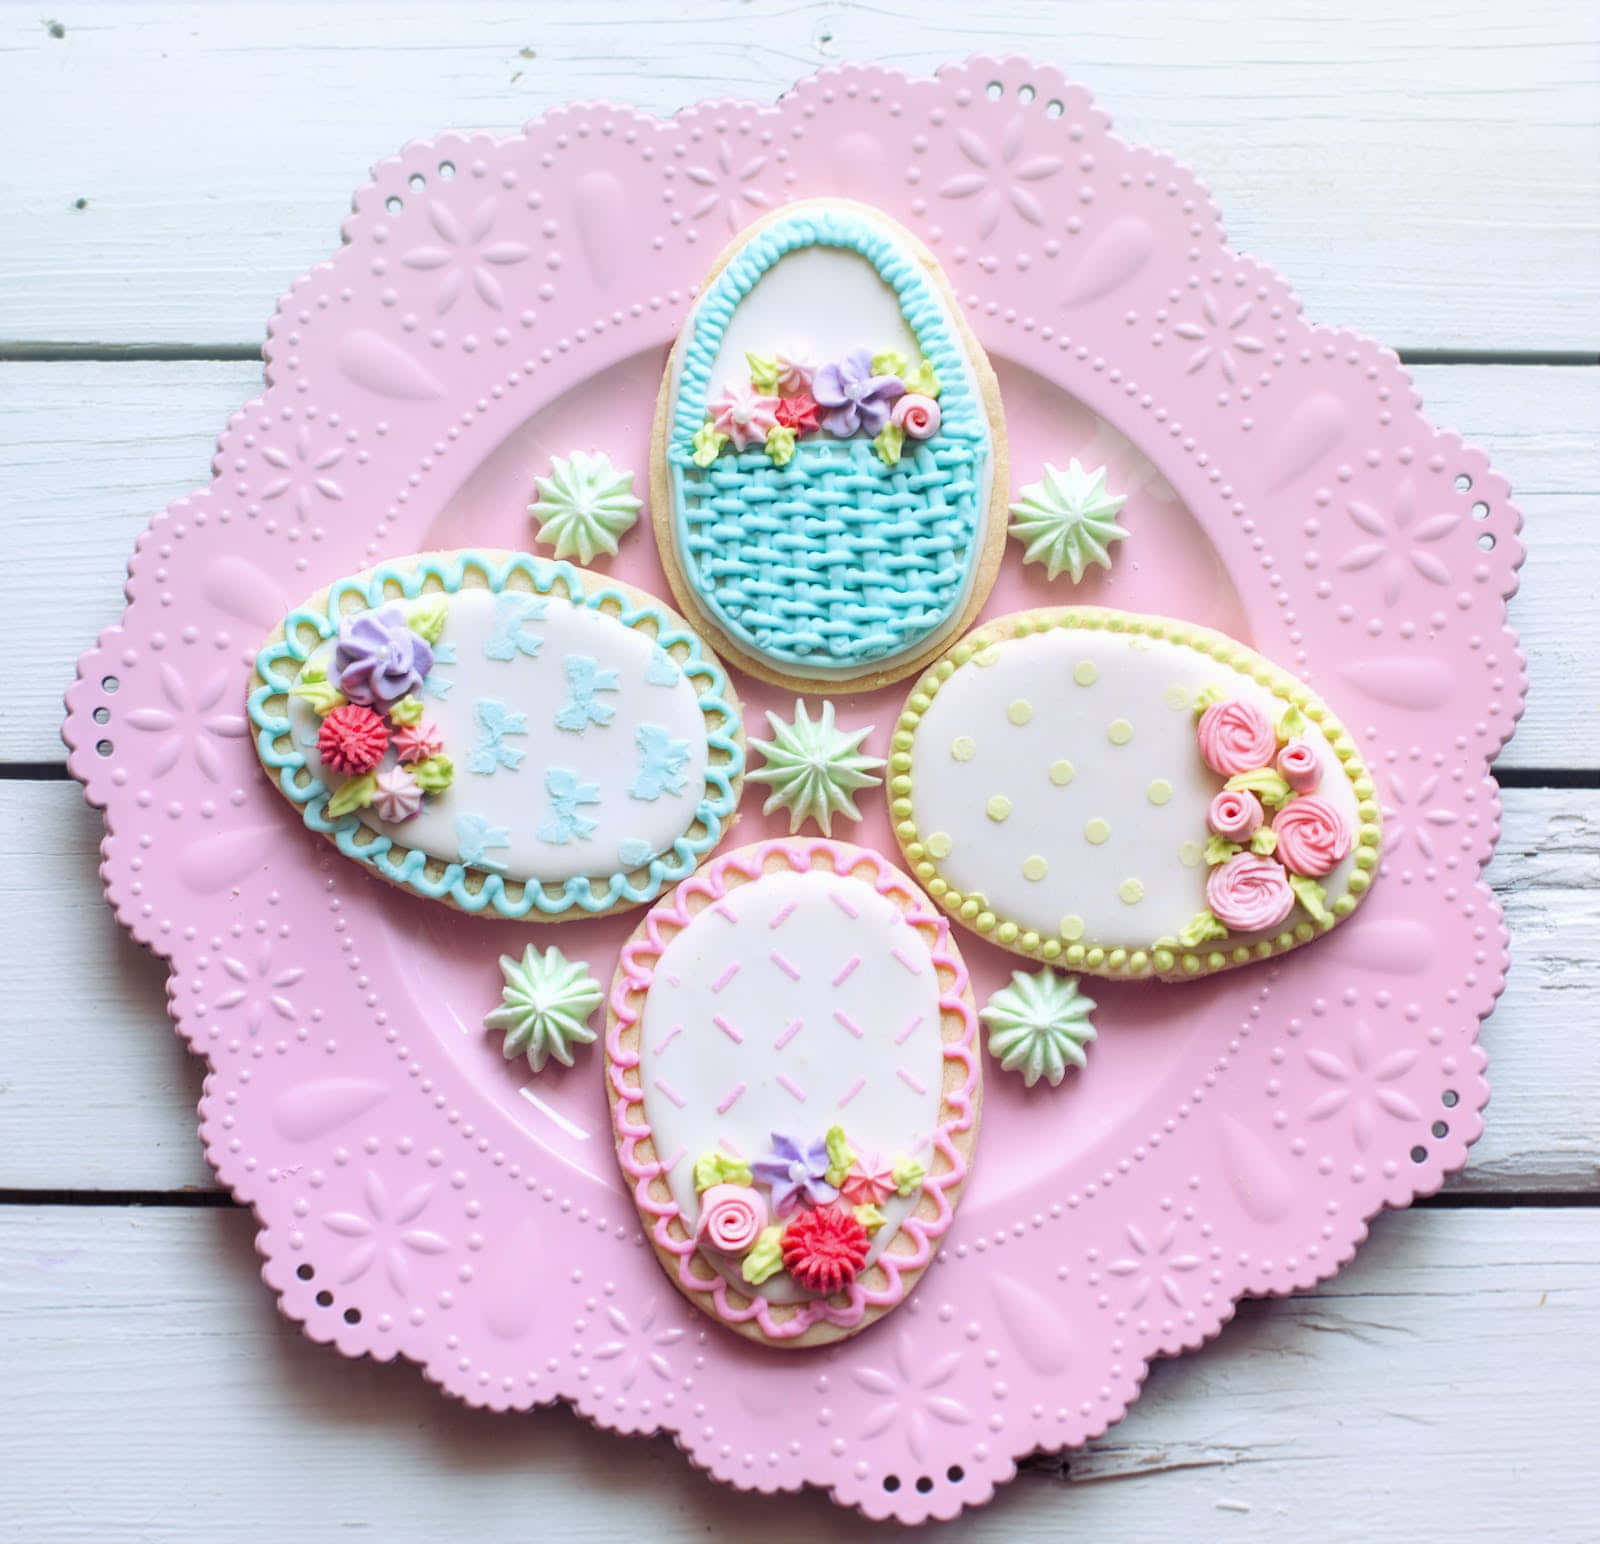 Four Cookies Decorated With Flowers And A Basket Wallpaper